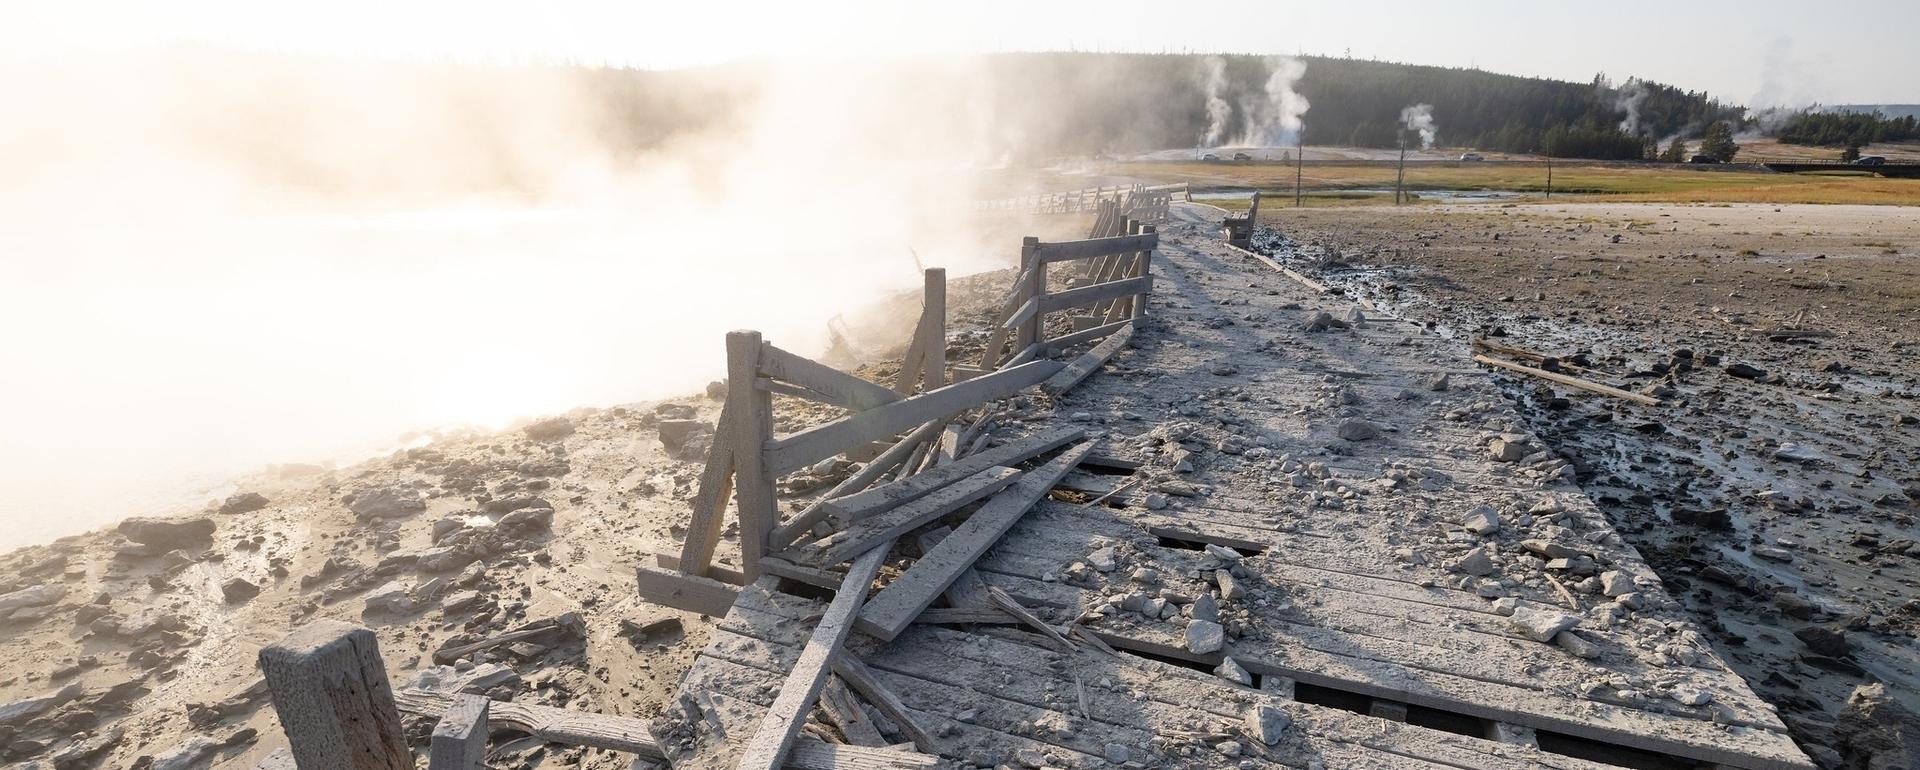 Remains of the day following the July 23 hydrothermal explosion in Yellowstone